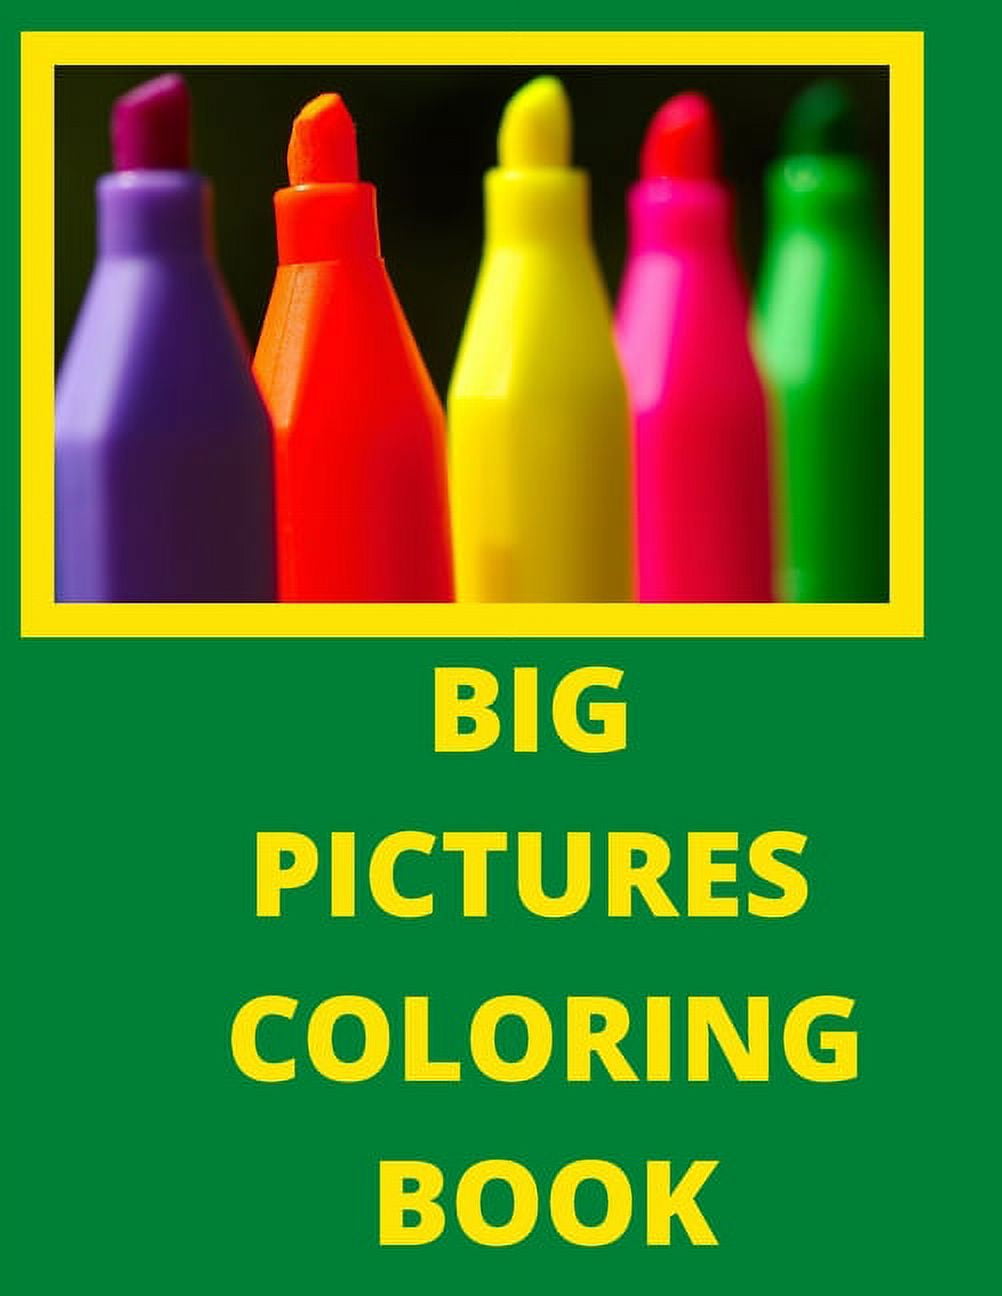 Coloring Books Large Print: Big Pictures Coloring Book : This is a